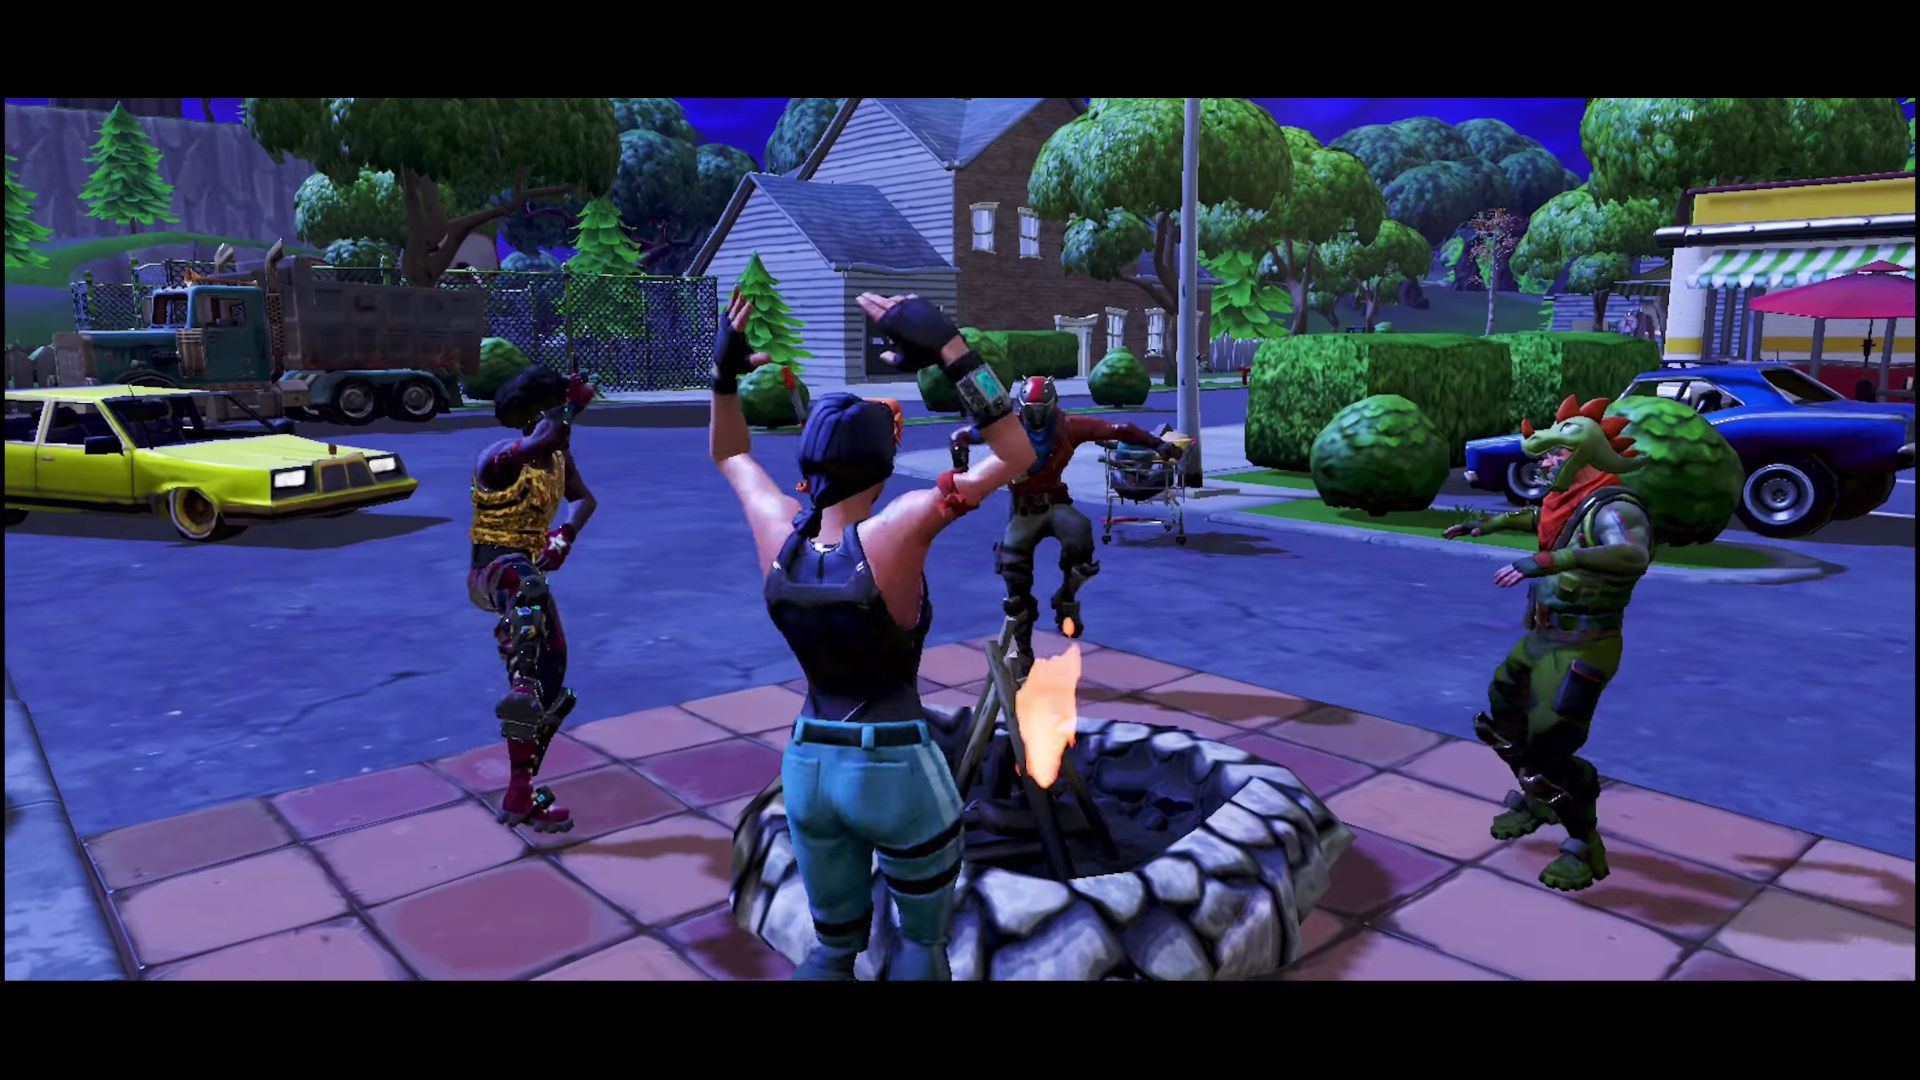 Fortnite Battle Royale Releases to iOS and Announces a ... - 1920 x 1080 png 2281kB